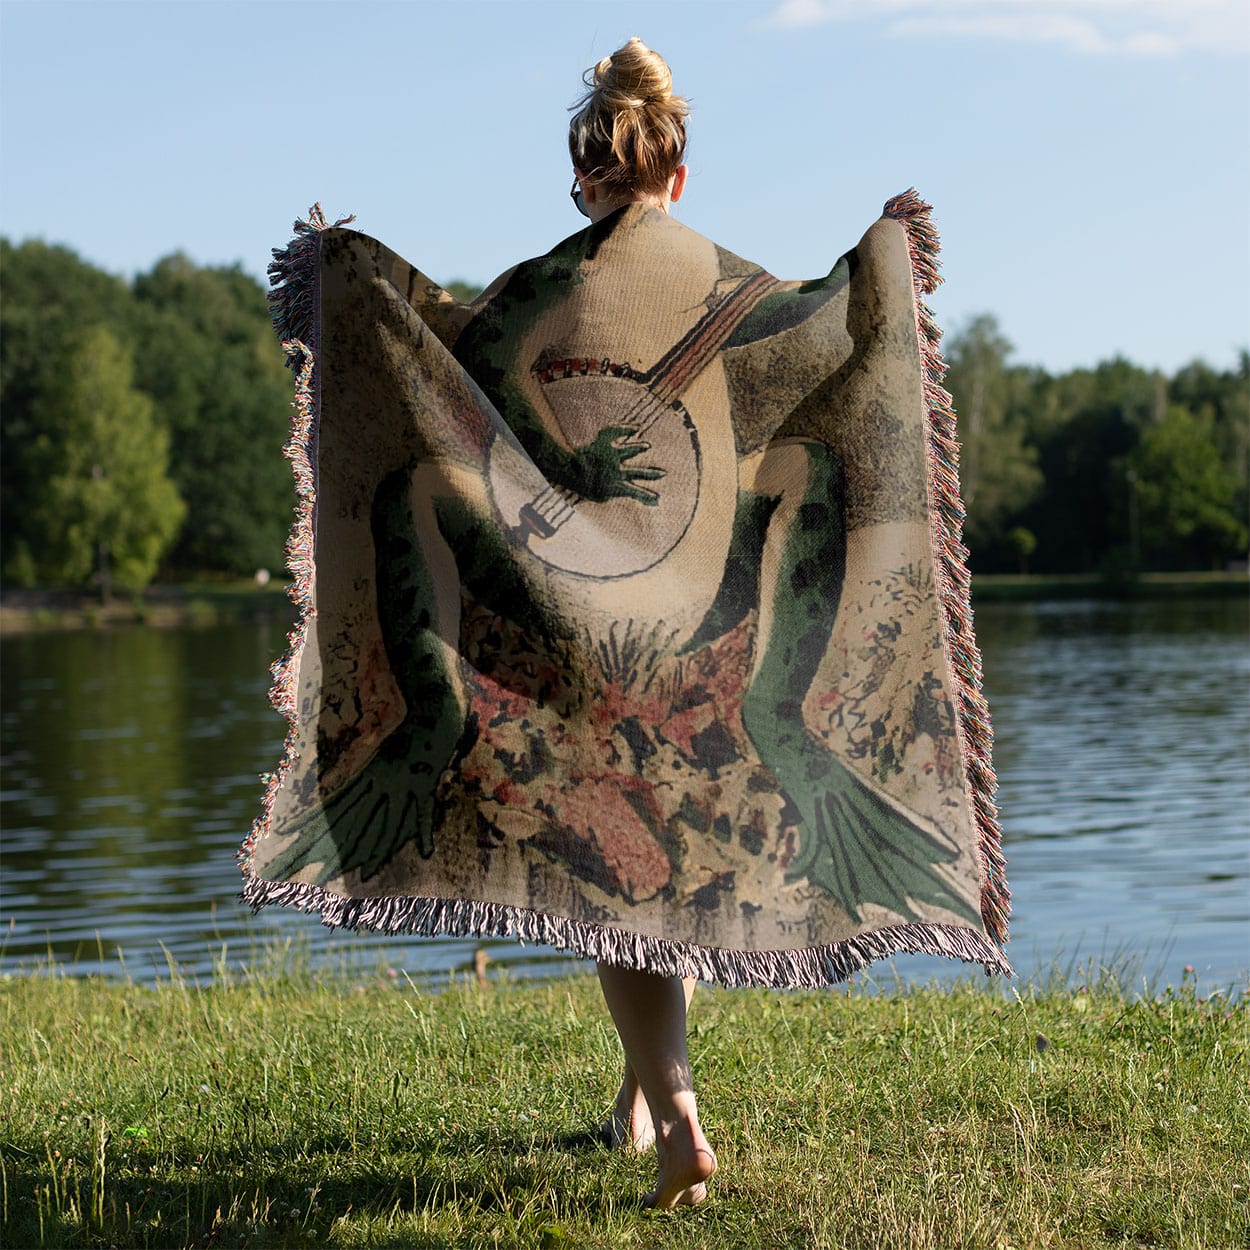 Funny Animal Woven Blanket Held on a Woman's Back Outside